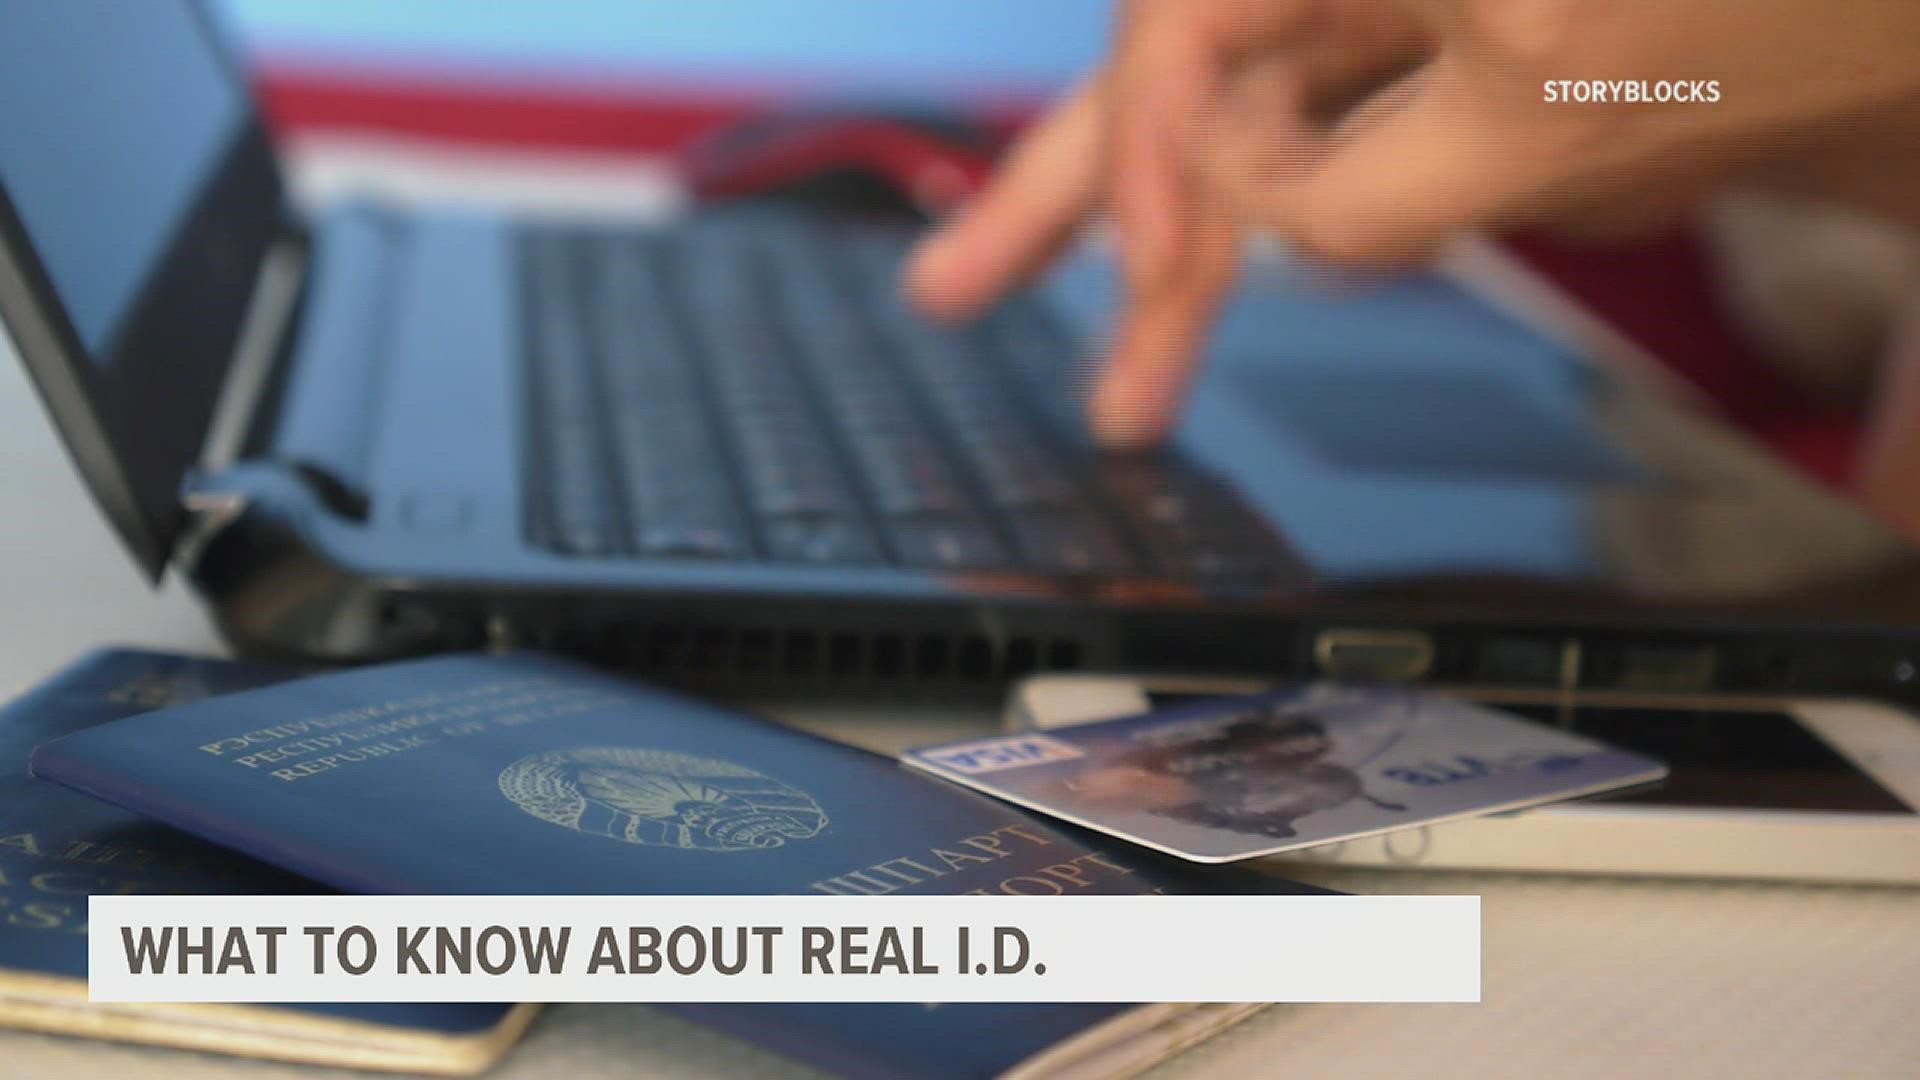 By 2023, Pennsylvanians will need to have either a Real ID compliant license/identification card or another form of acceptable identification when traveling.